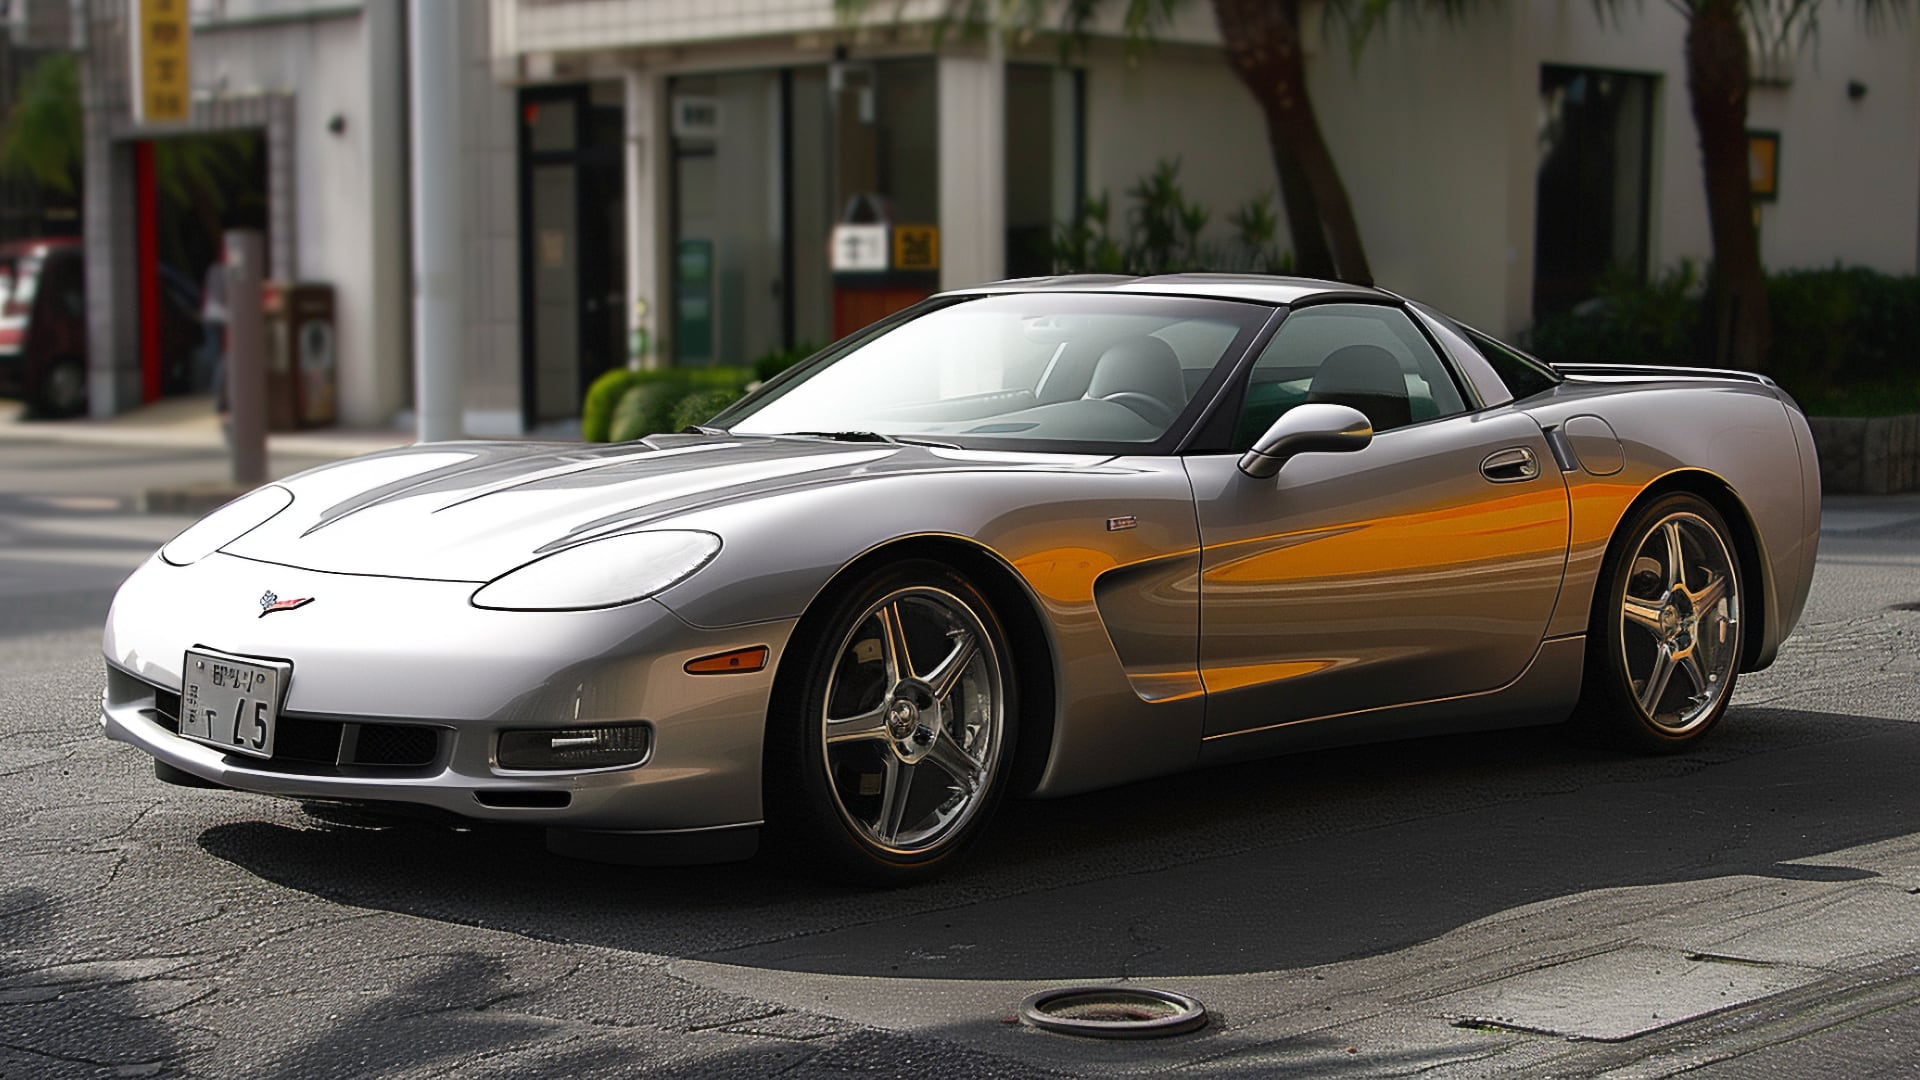 A silver Chevrolet Corvette C5 parked on a street, years to avoid.